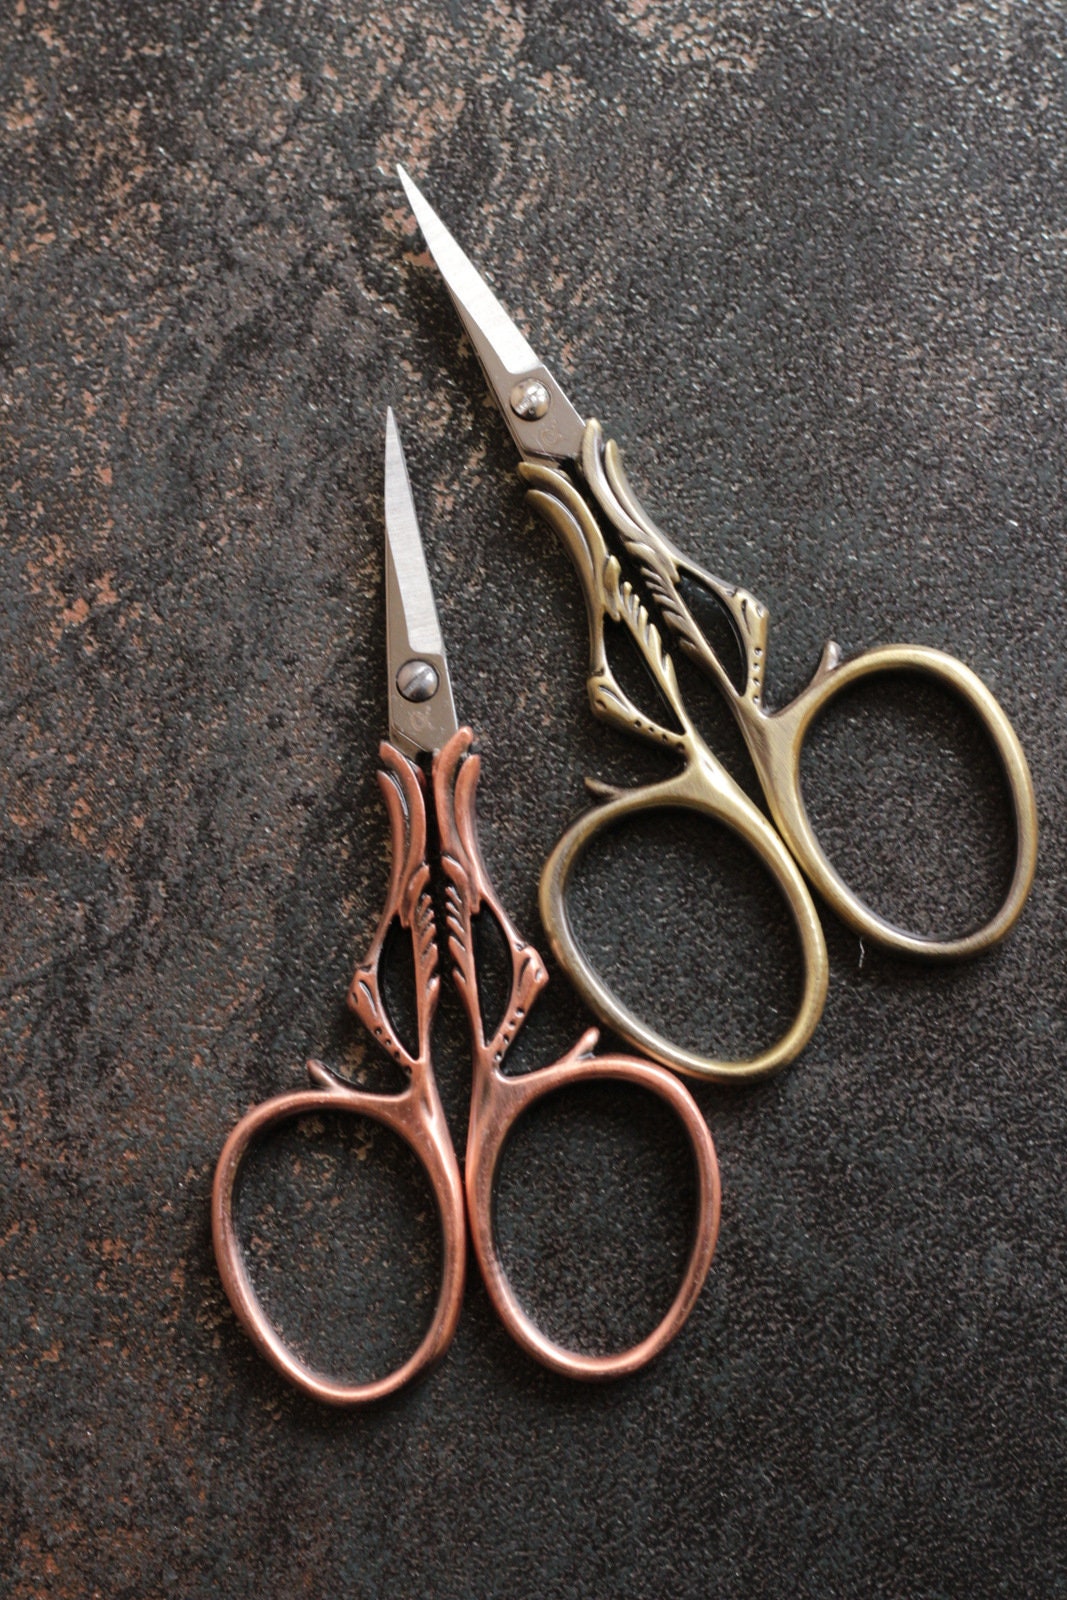 Mini Embroidery Scissors, 4 Colors Available. Small Vintage Scissors,  Durable Small Sewing Scissors. 